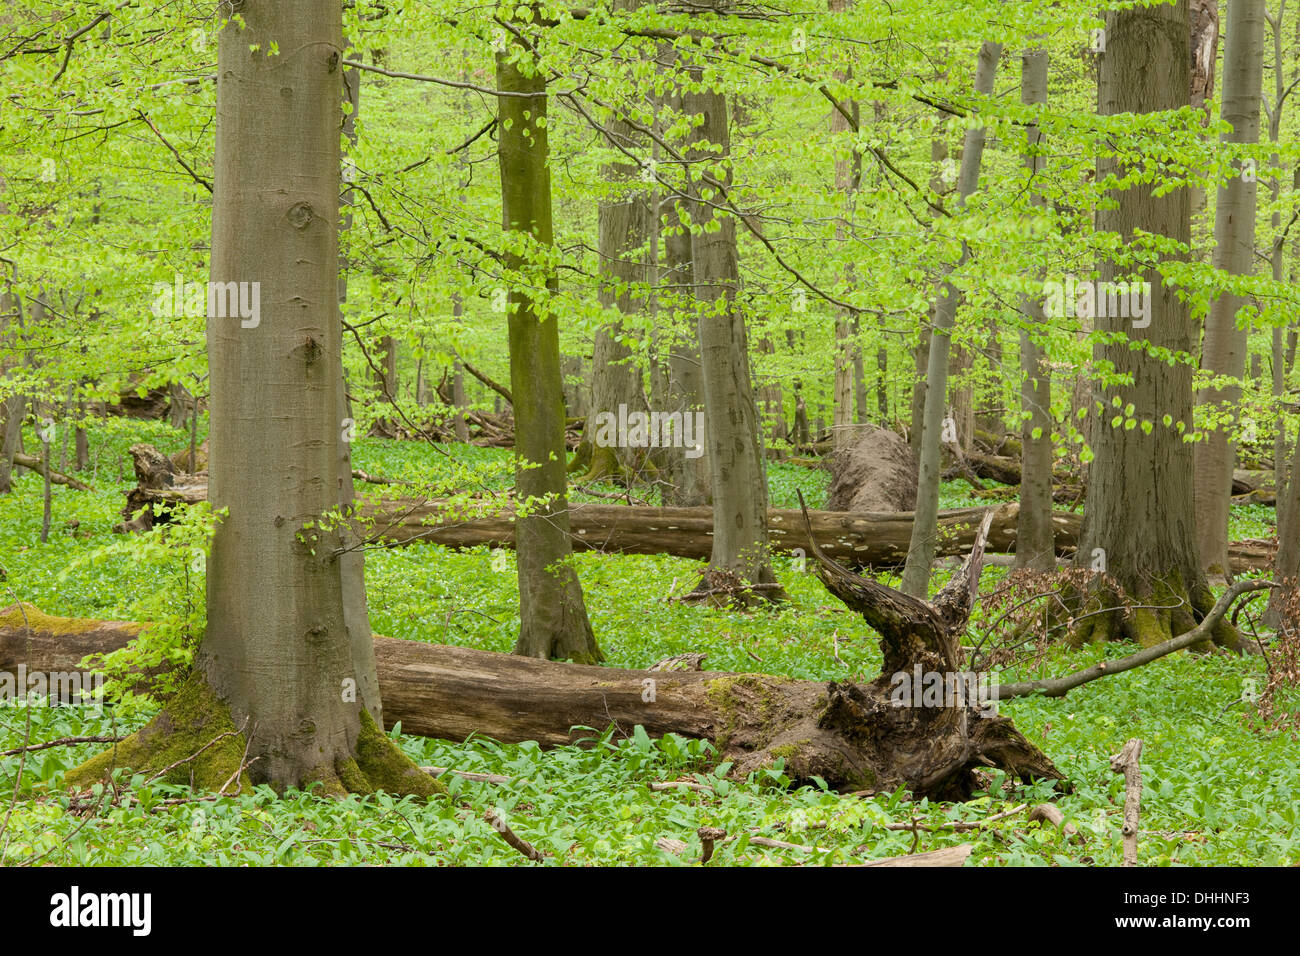 European beech forest in spring, beeches (Fagus sylvatica) with a lot of dead wood, Hainich National Park, Thuringia, Germany Stock Photo